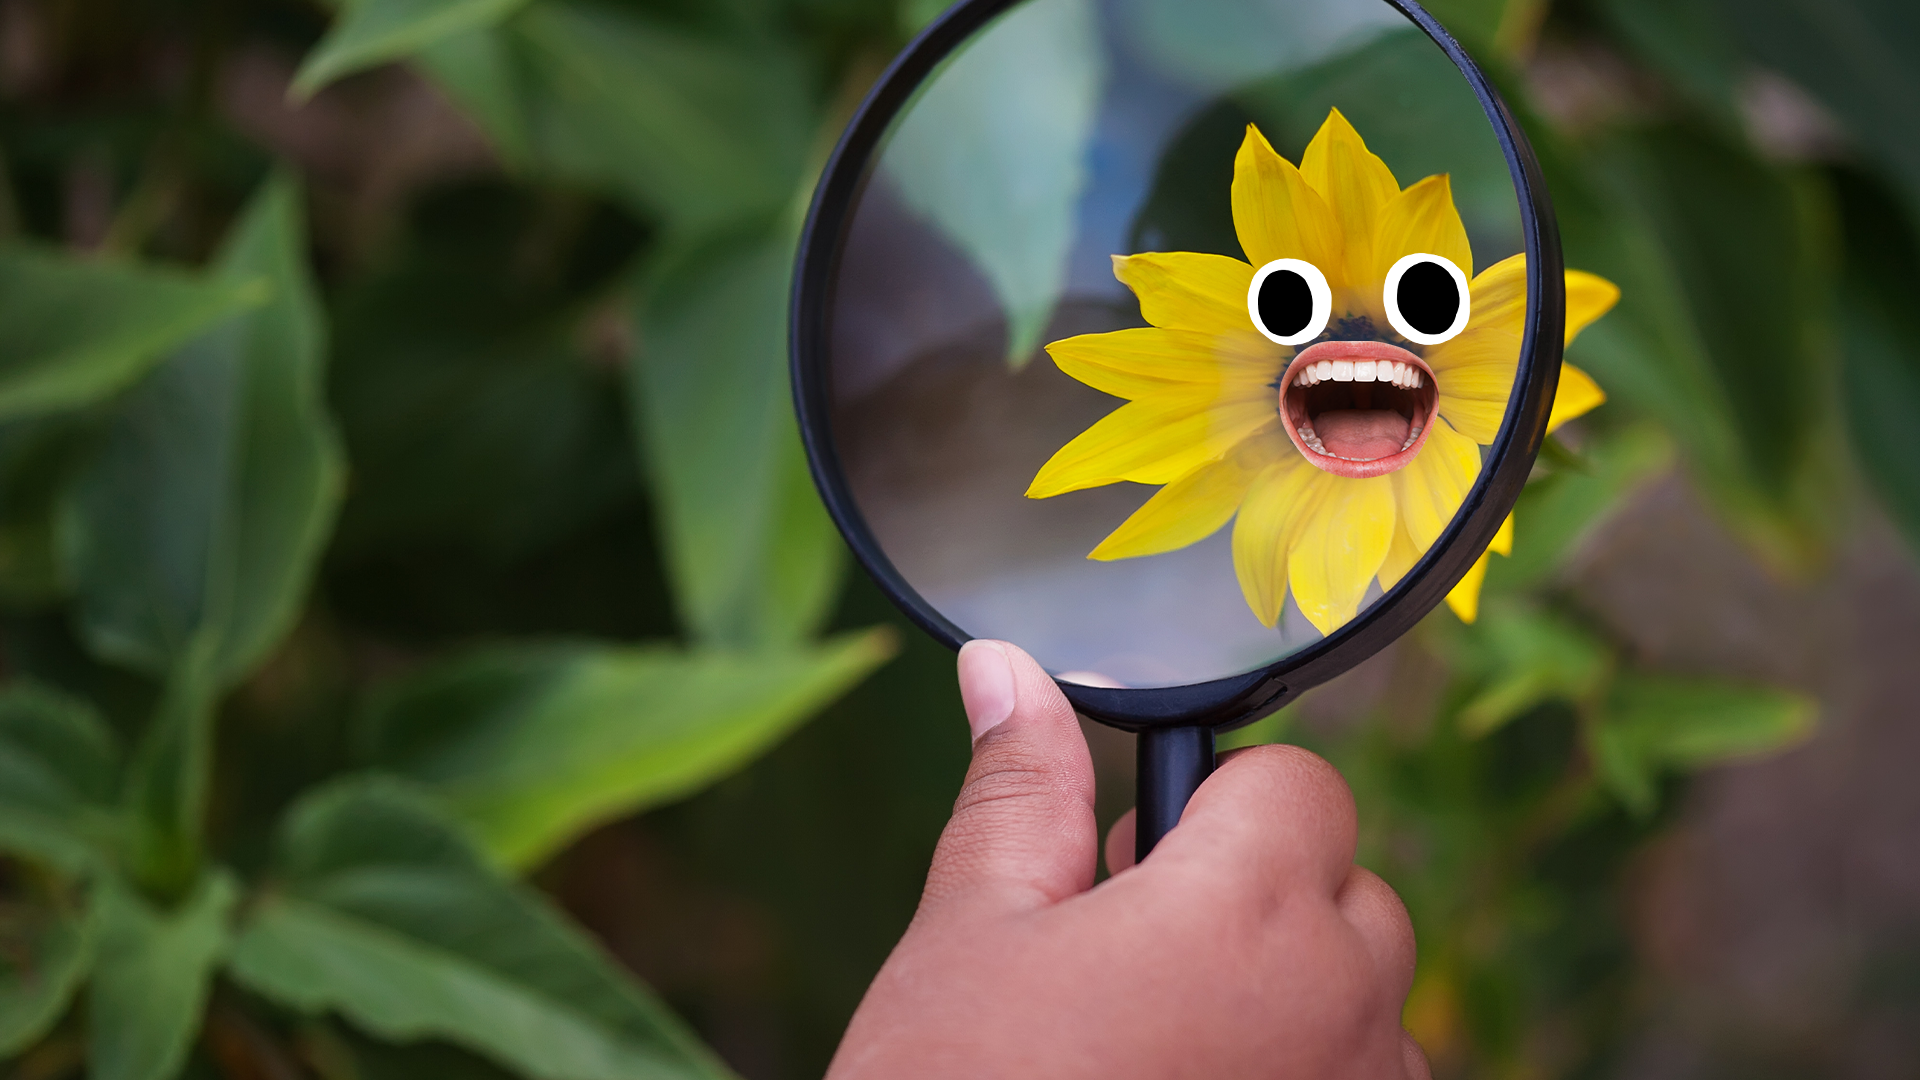 Hand examining flower with face under magnifying glass 